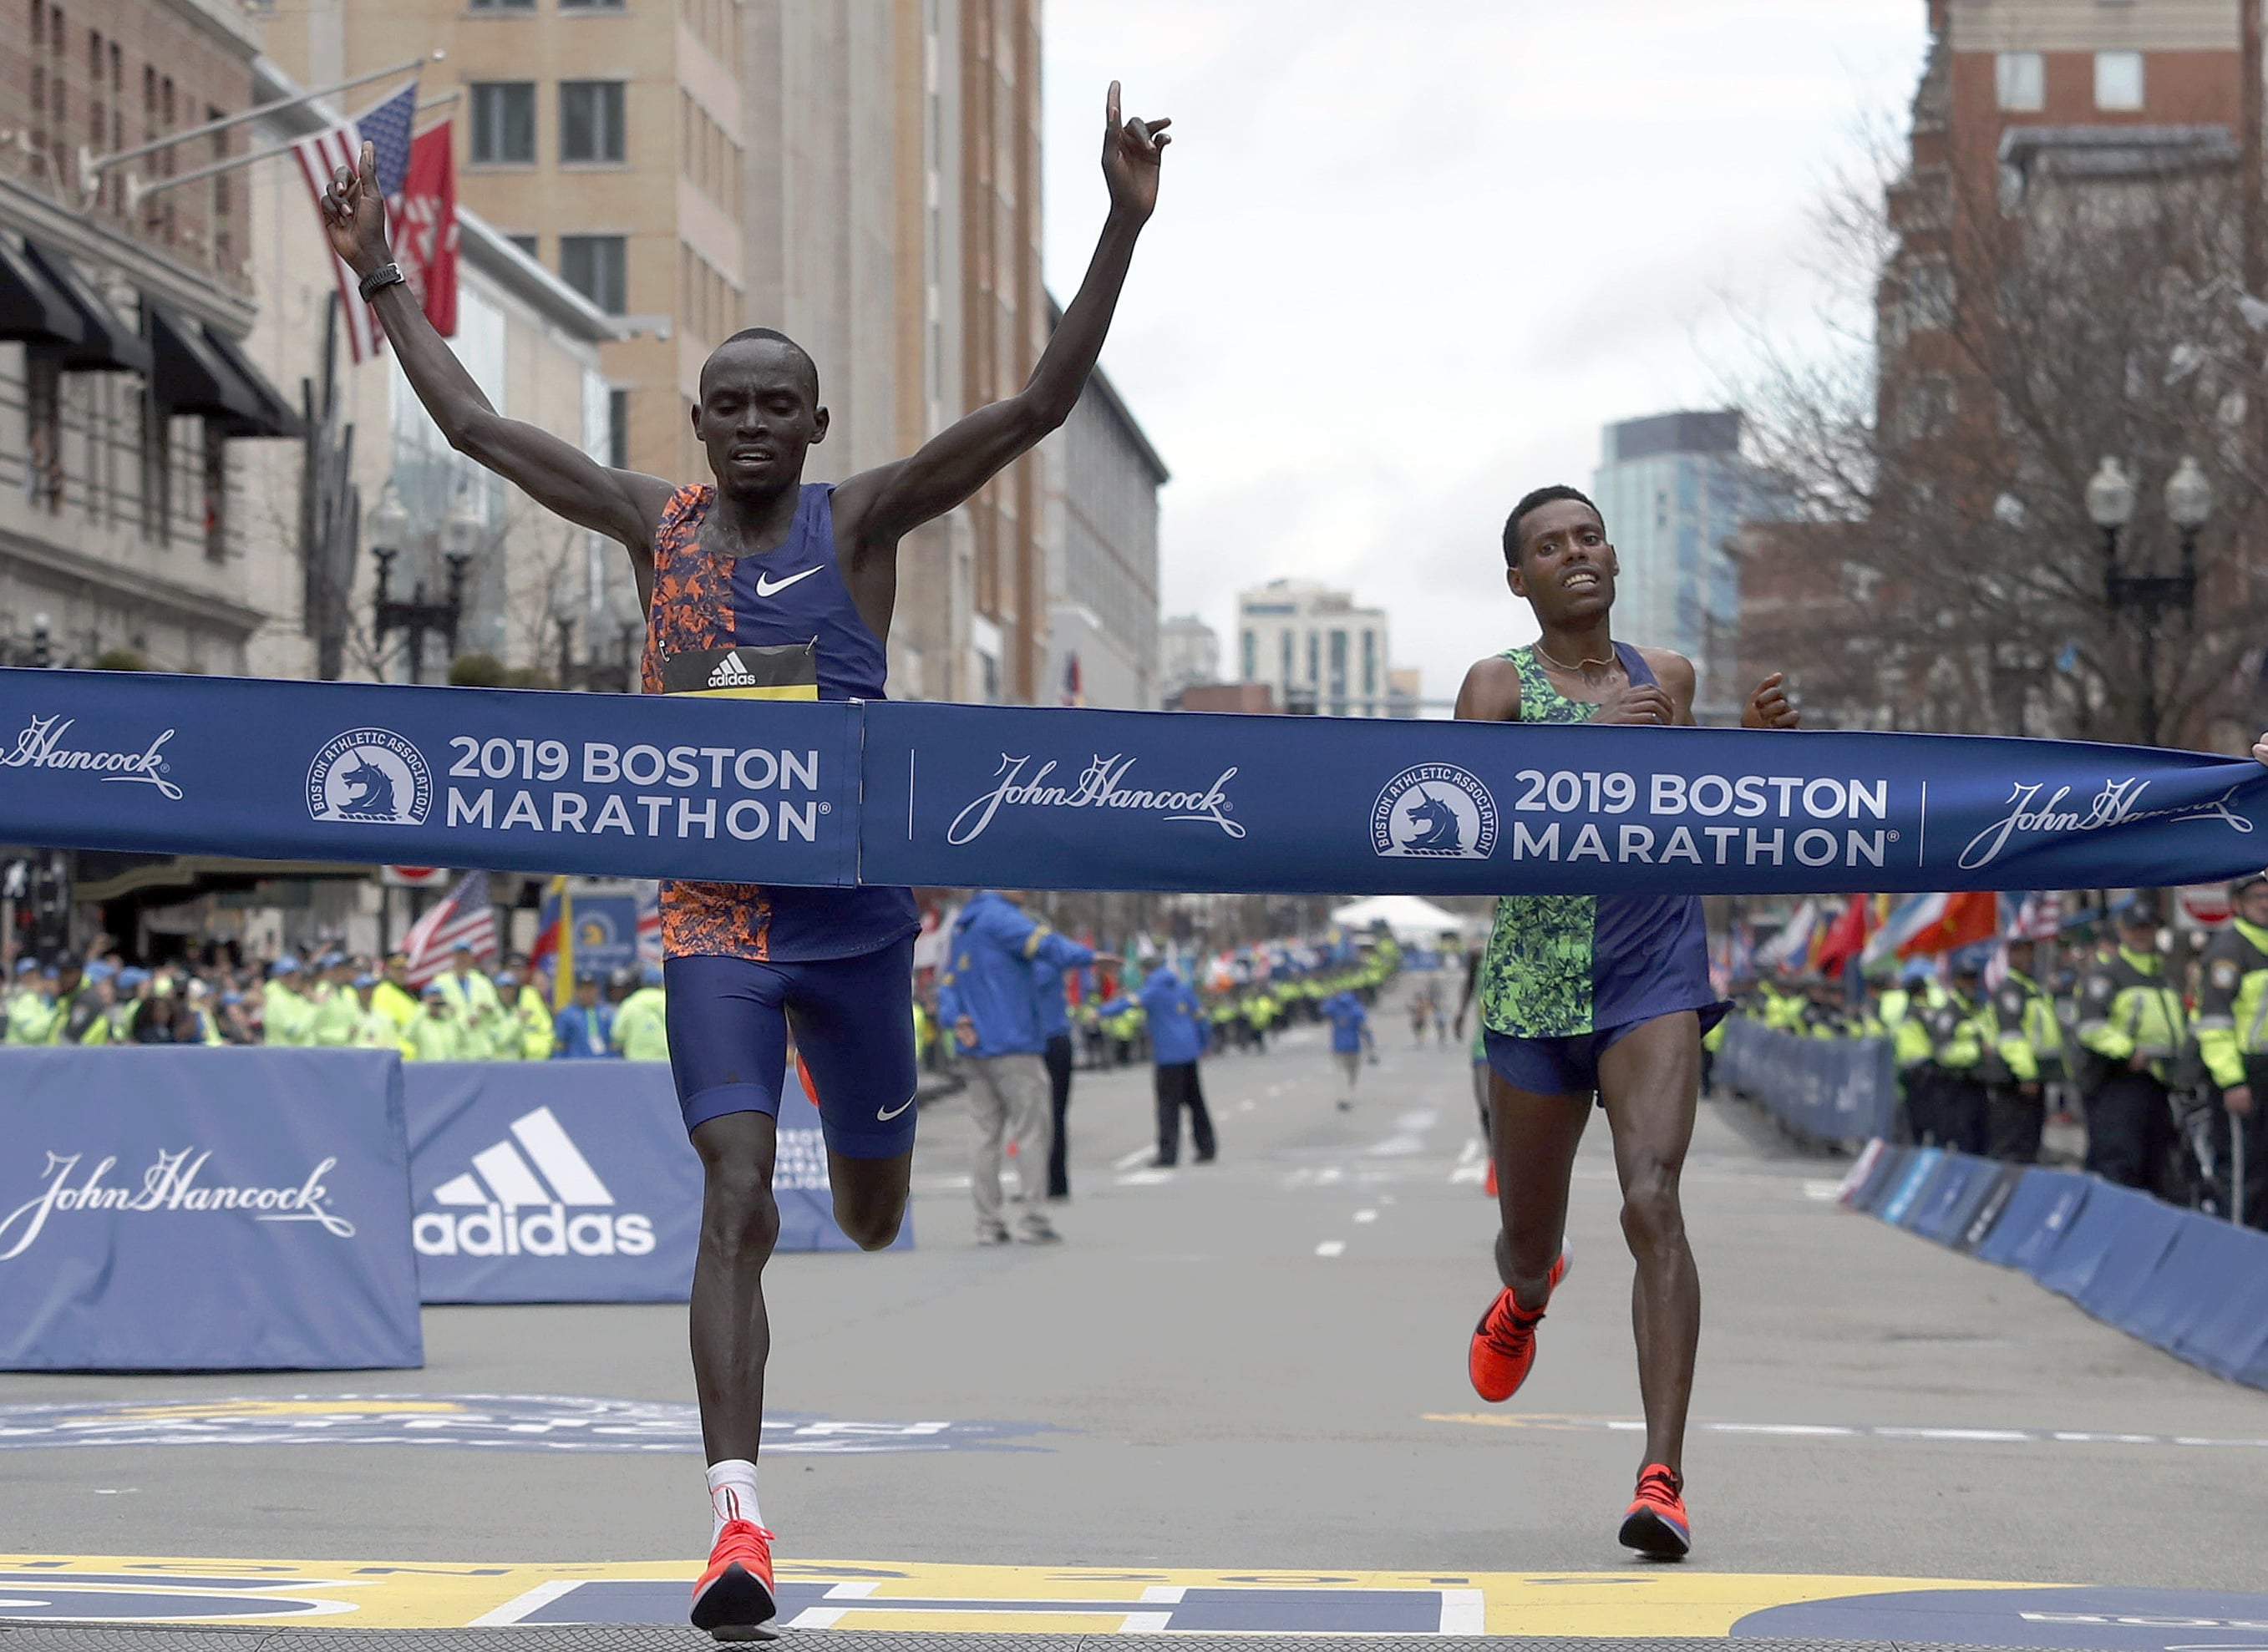 Lawrence Cherono, of Kenya, hits the tape to win the 123rd Boston Marathon in front of Lelisa Desisa, of Ethiopia, right, on Monday, April 15, 2019, in Boston.